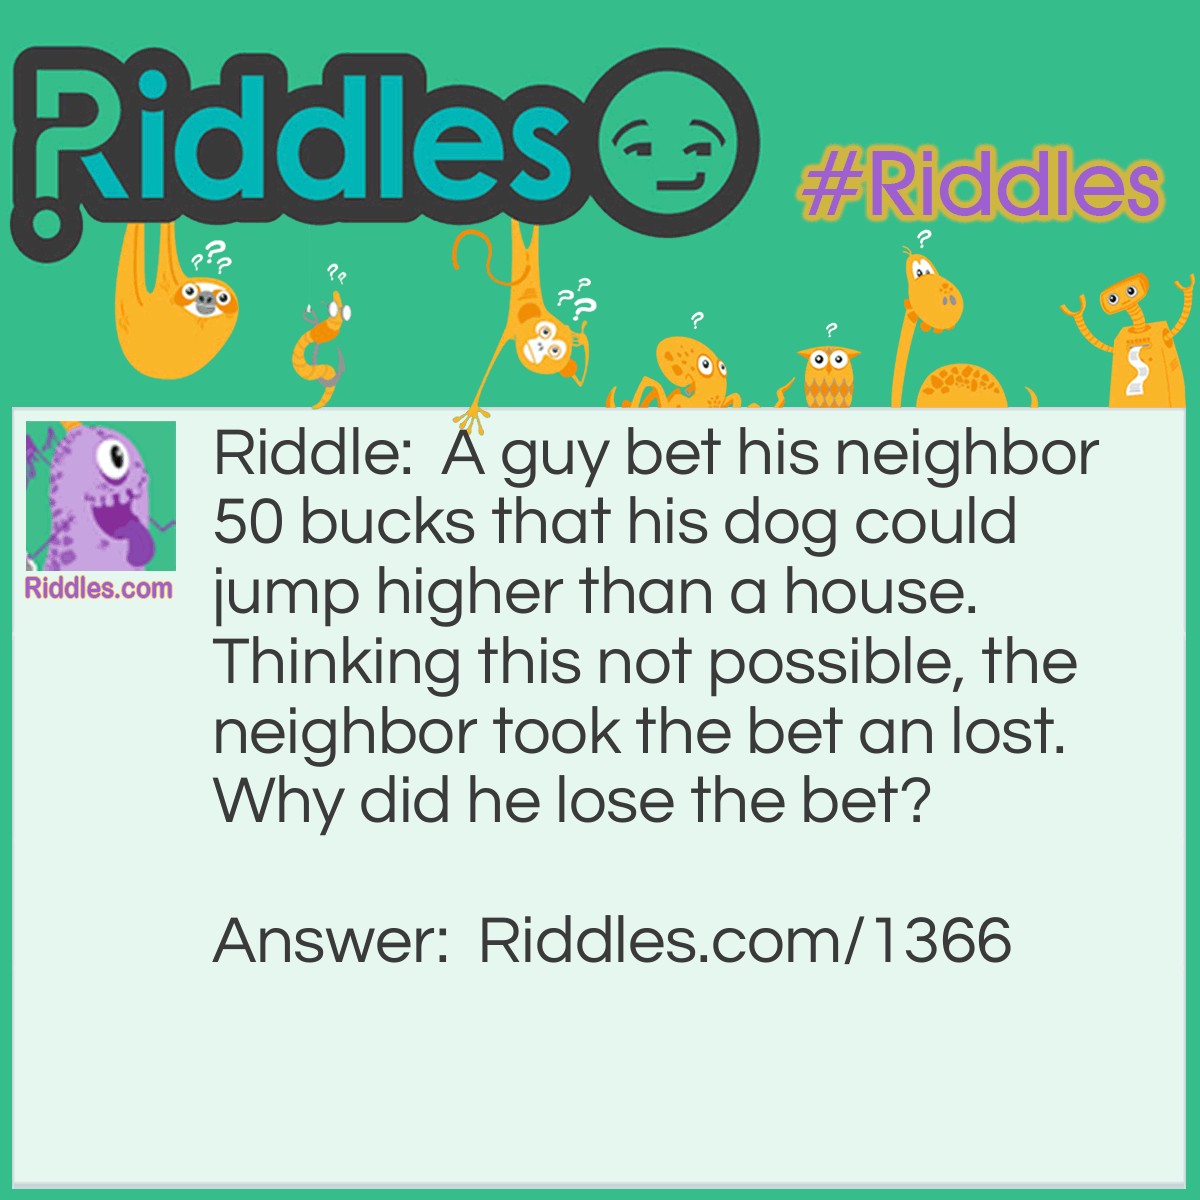 Riddle: A guy bet his neighbor 50 bucks that his dog could jump higher than a house. Thinking this was not possible, the neighbor took the bet and lost.
Why did he lose the bet? Answer: <p style="text-align: left;">A house can not jump!